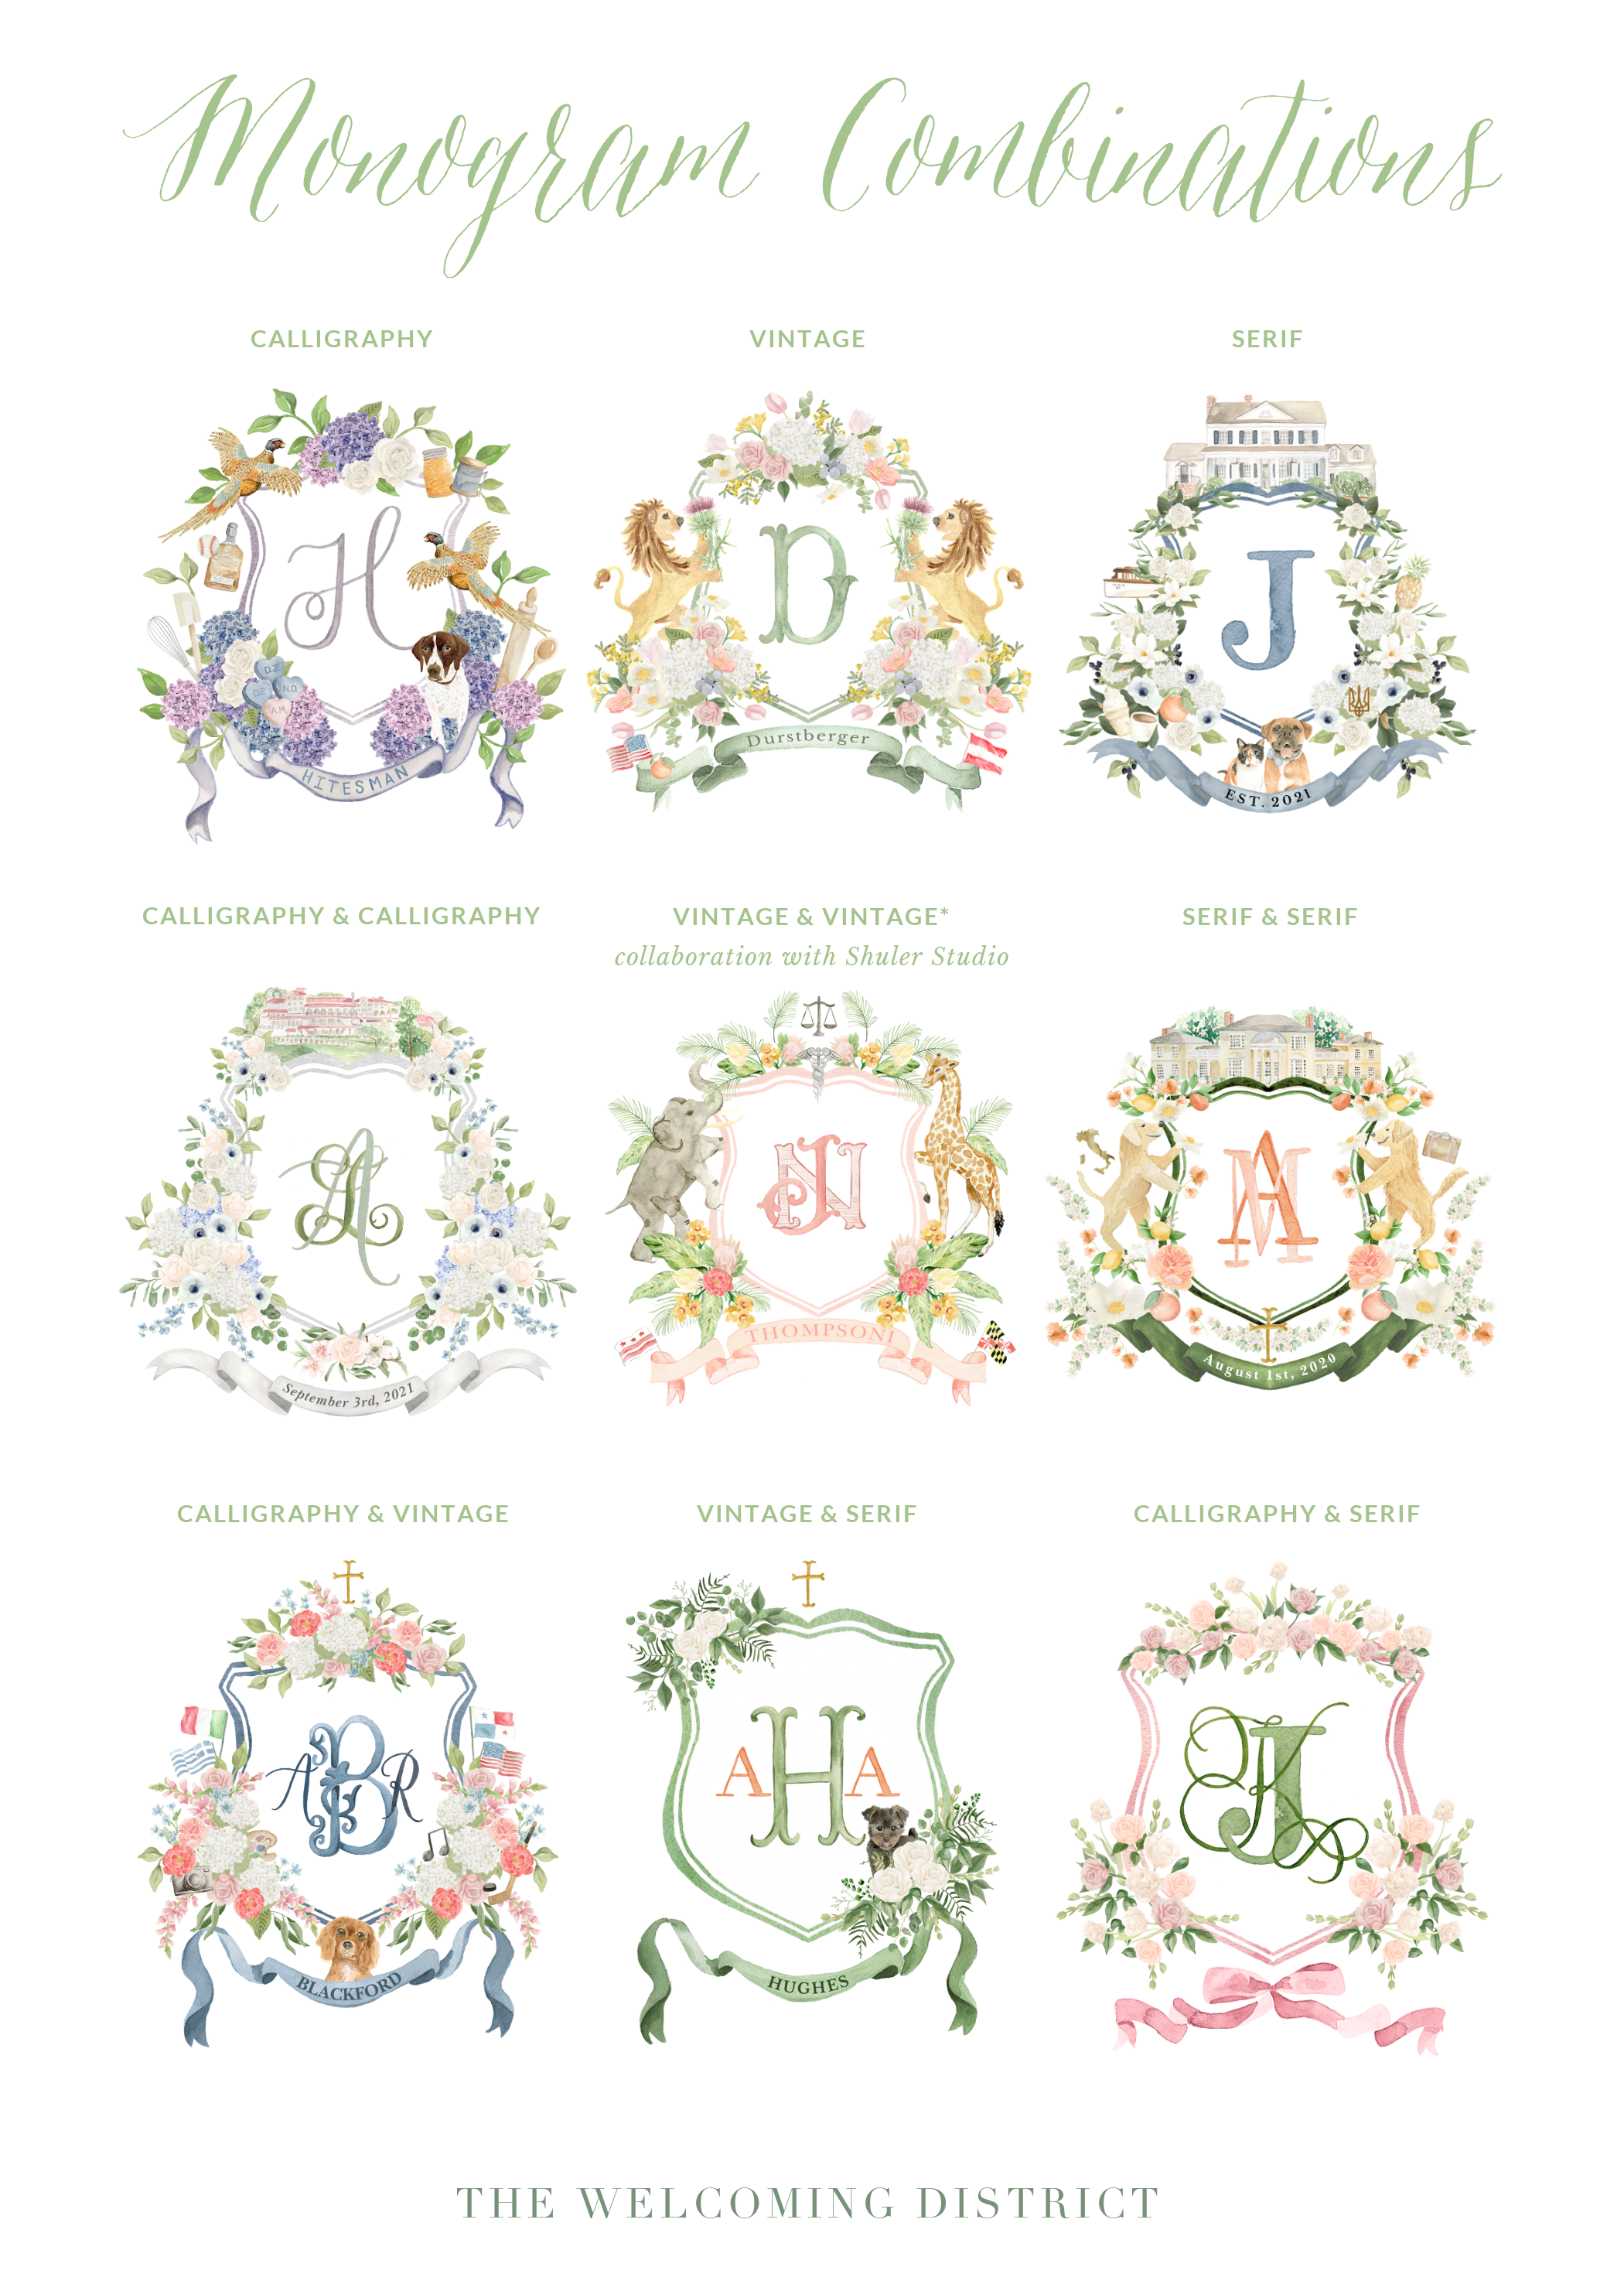 Three different types of lettering styles are used inside each watercolor crest: calligraphy, vintage, and serif. Mix and match them for a unique look of your own! Designs by watercolor artist, Alicia Betz, of The Welcoming District.